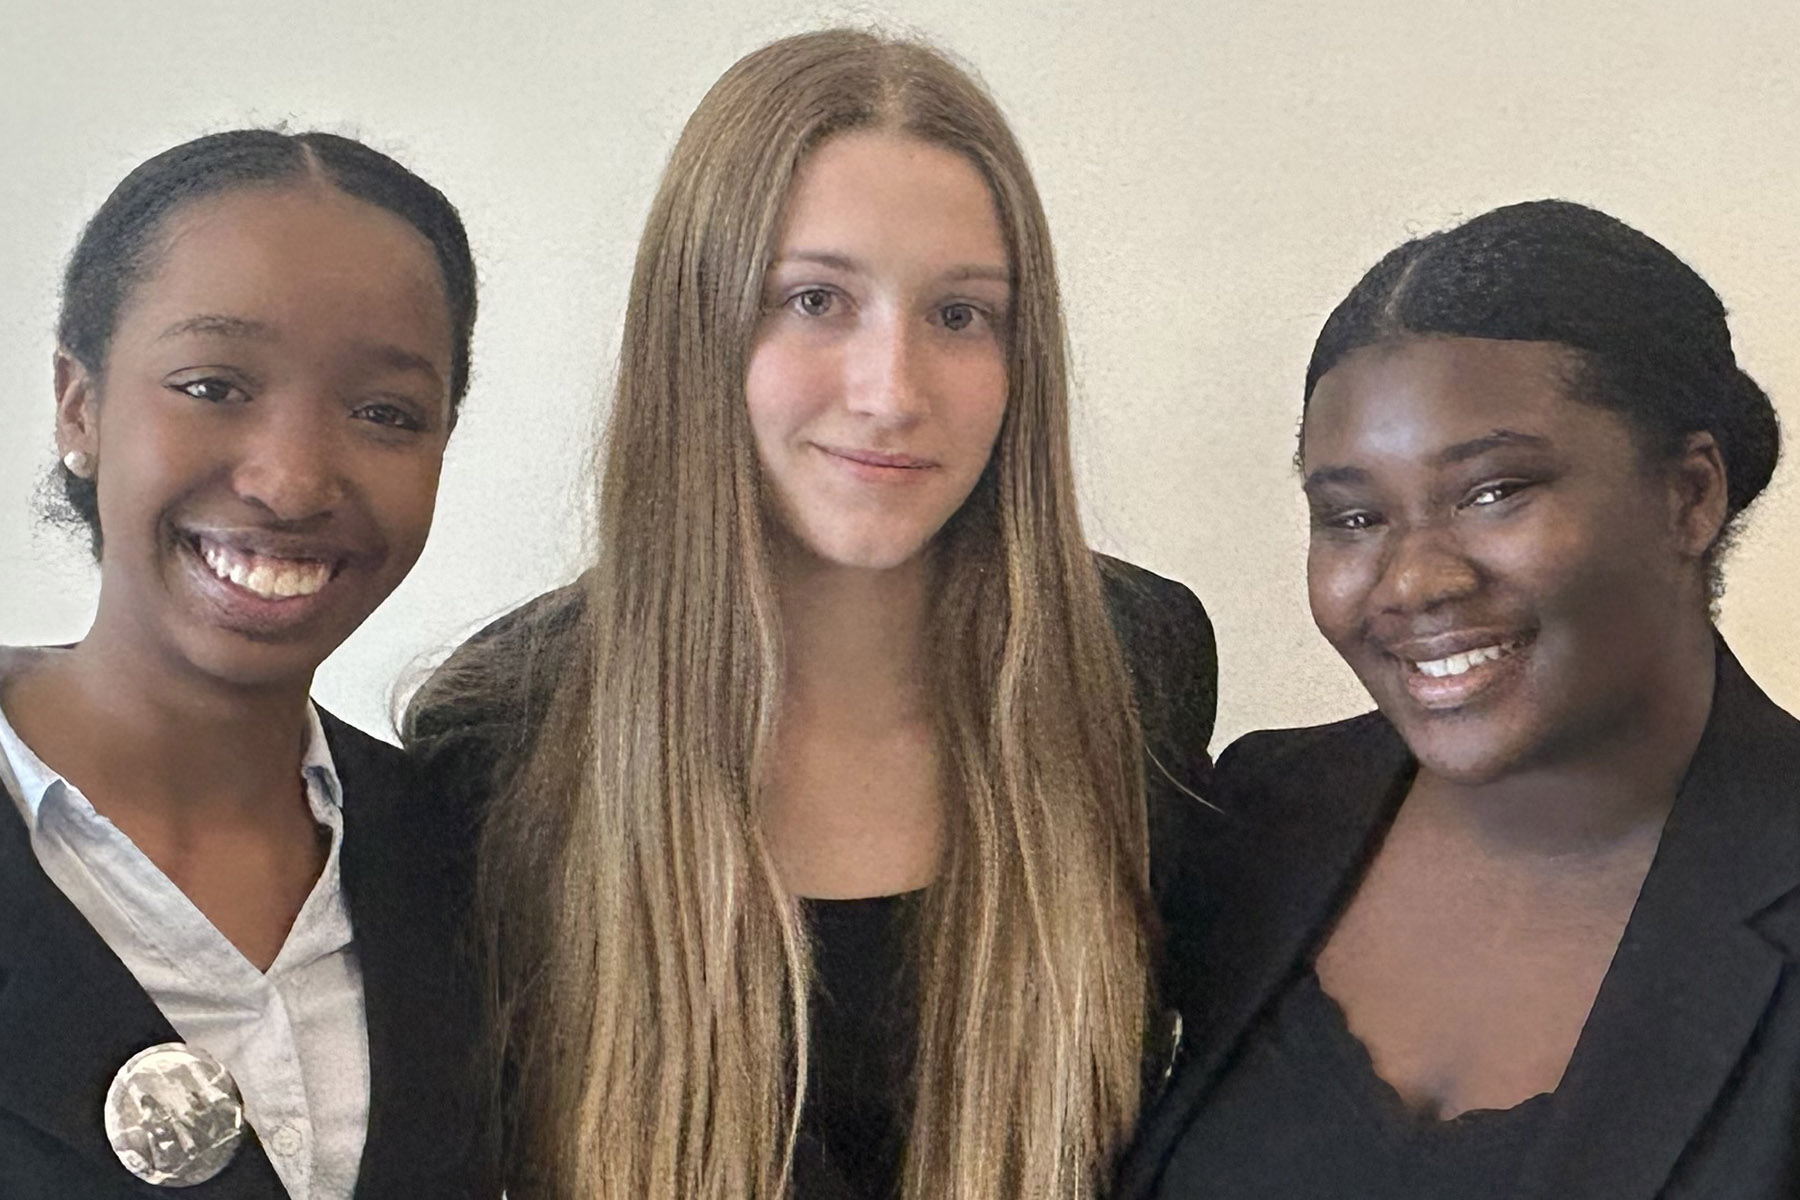 From left, Ariana Tama, Reagan Turnbow and Katema Sarpong-Asiedu won third place for their documentary, “Bloody Sunday.” The short film chronicled the brutal attack of 600 civil rights marchers on the Edmund Pettus Bridge in Selma, Alabama, in 1965 when law enforcement descended on the group with billy clubs and tear gas. The event led to the Voting Rights Act of 1965, which prohibits racial discrimination in voting. (MTSU photo by Nancy DeGennaro)